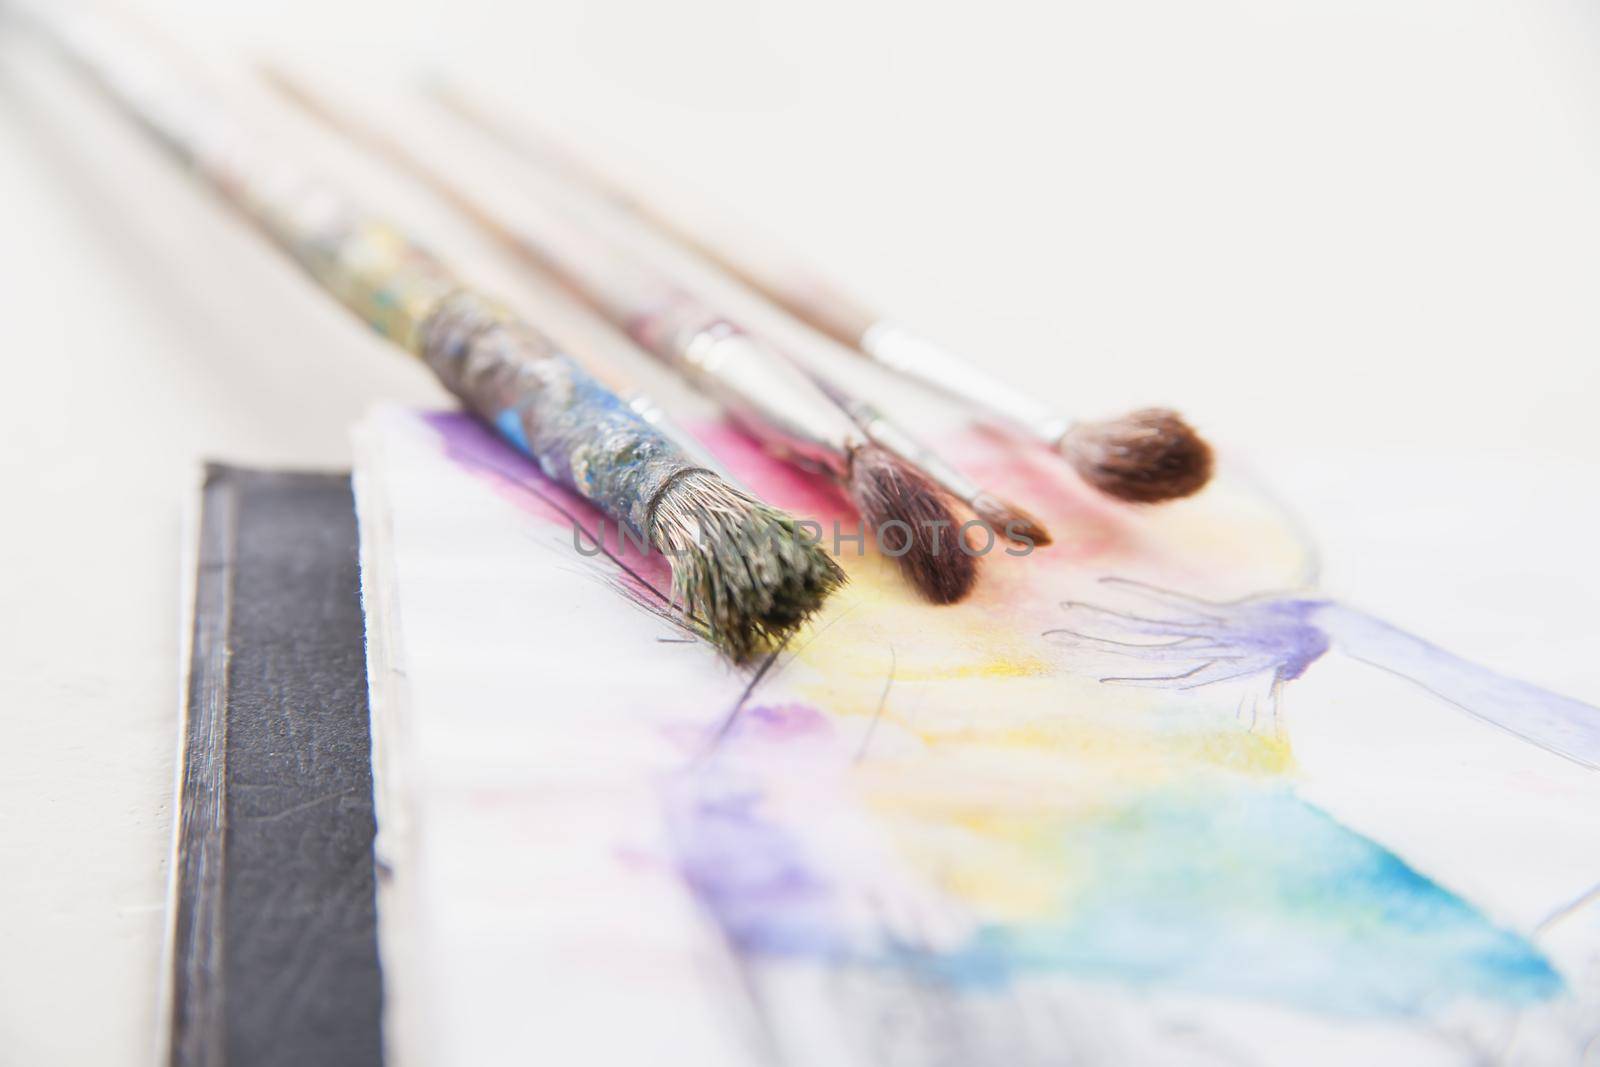 paint brushes lying on painted background by Julenochek